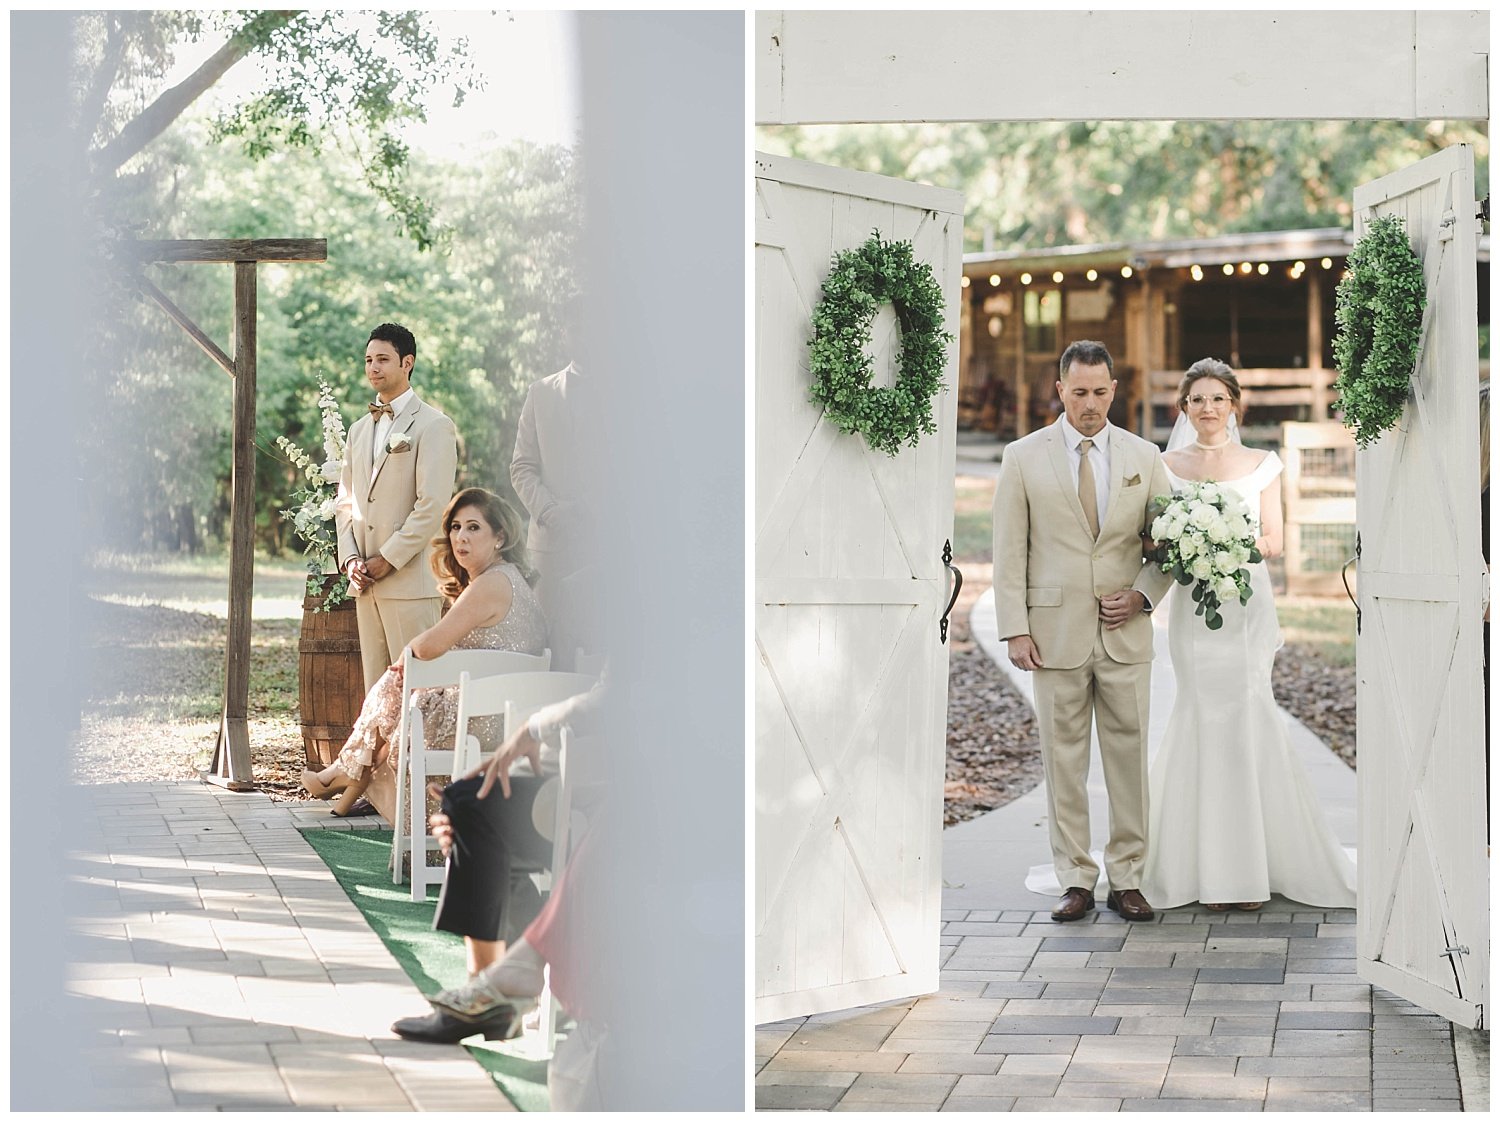 Capturing Love and Laughter: Nikki and Sahid's Fairytale Wedding at Still Creek Farm